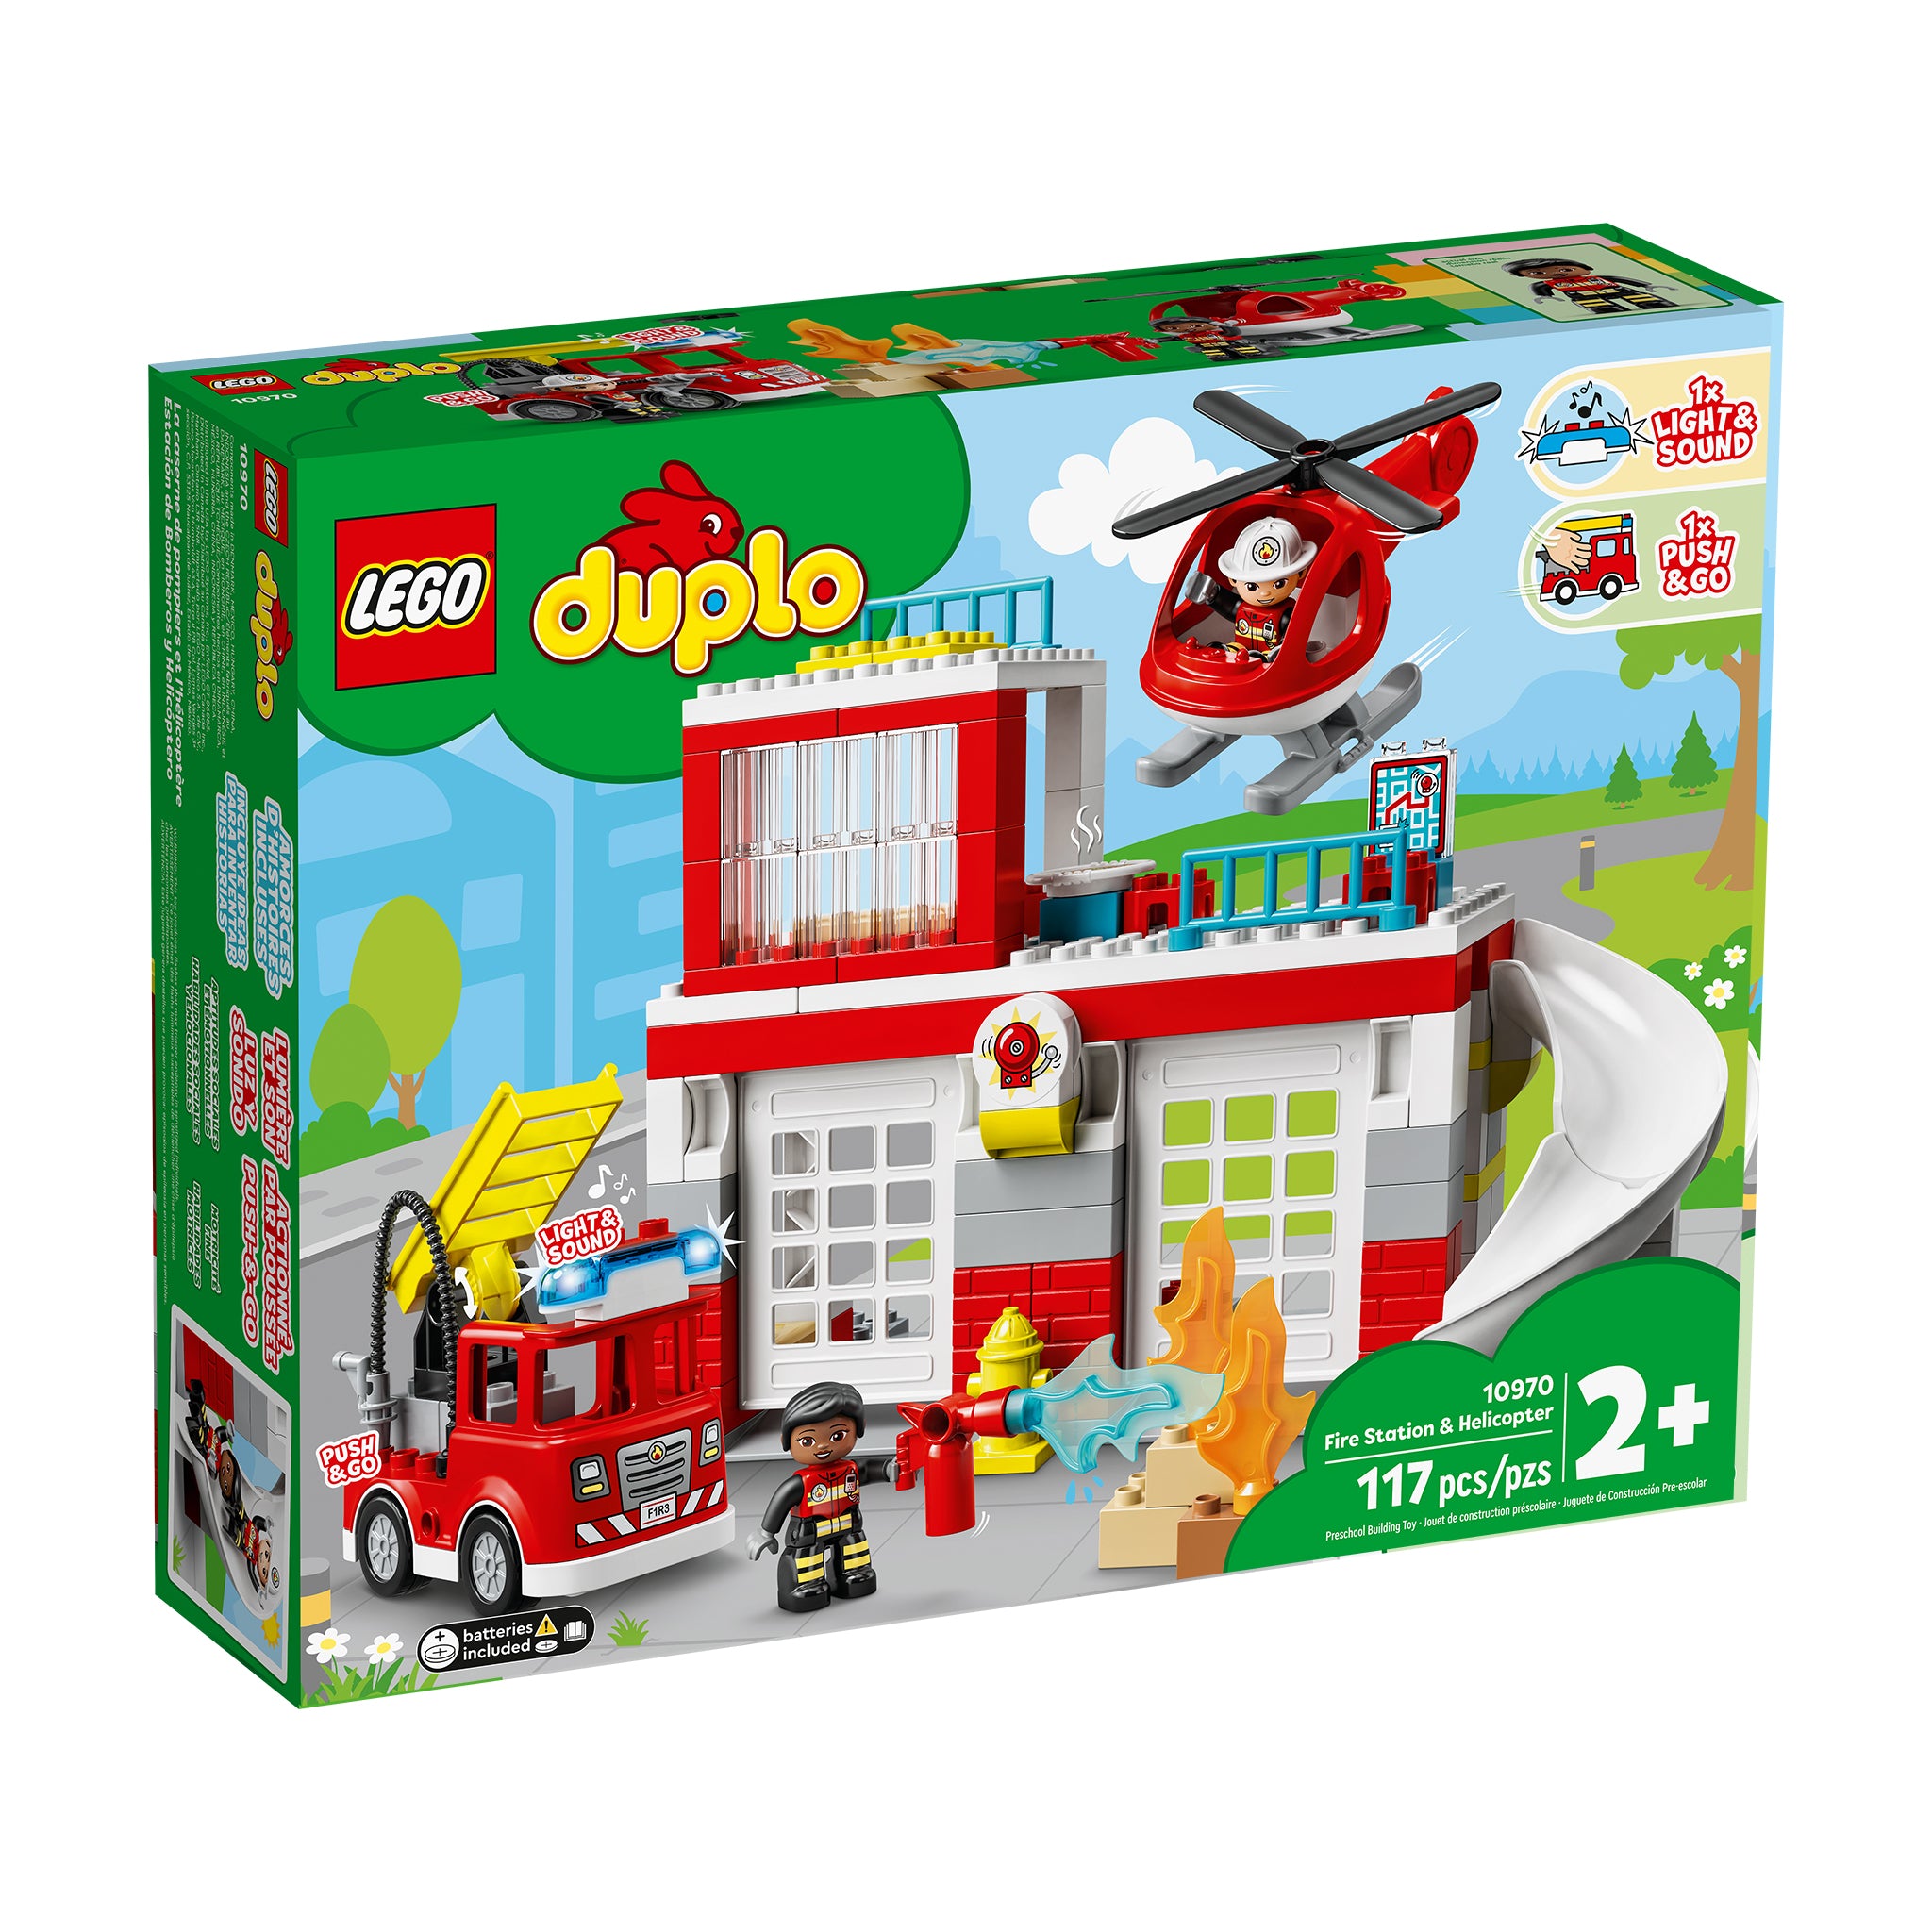 LEGO® DUPLO® Fire Station & Helicopter – The Boeing Store